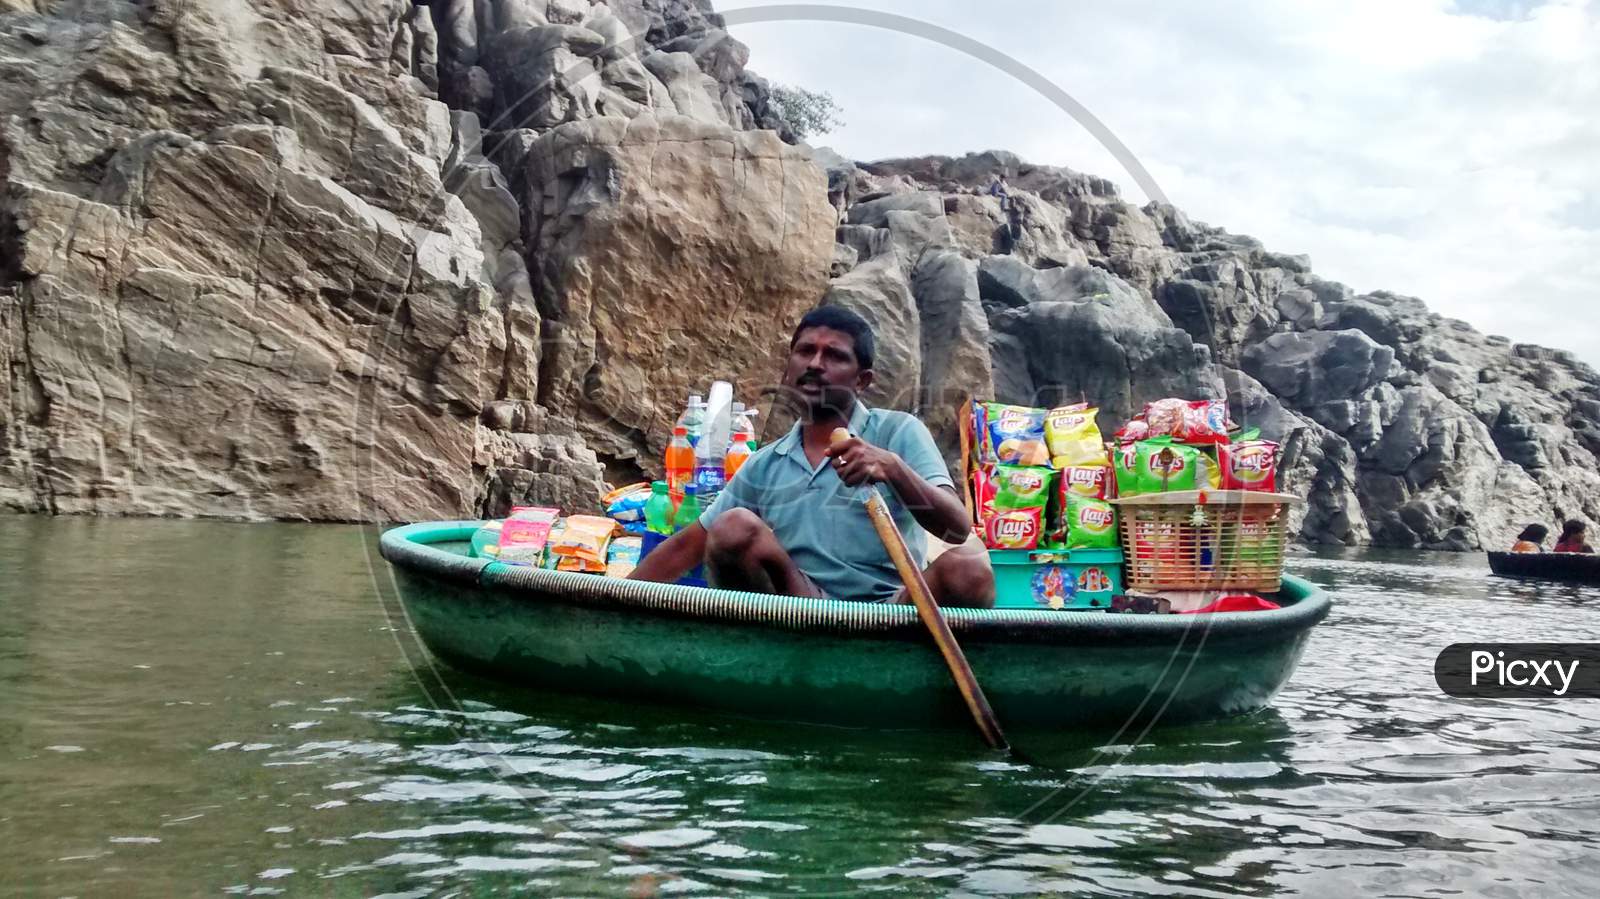 A vendor selling food items in Boat at a tourist place